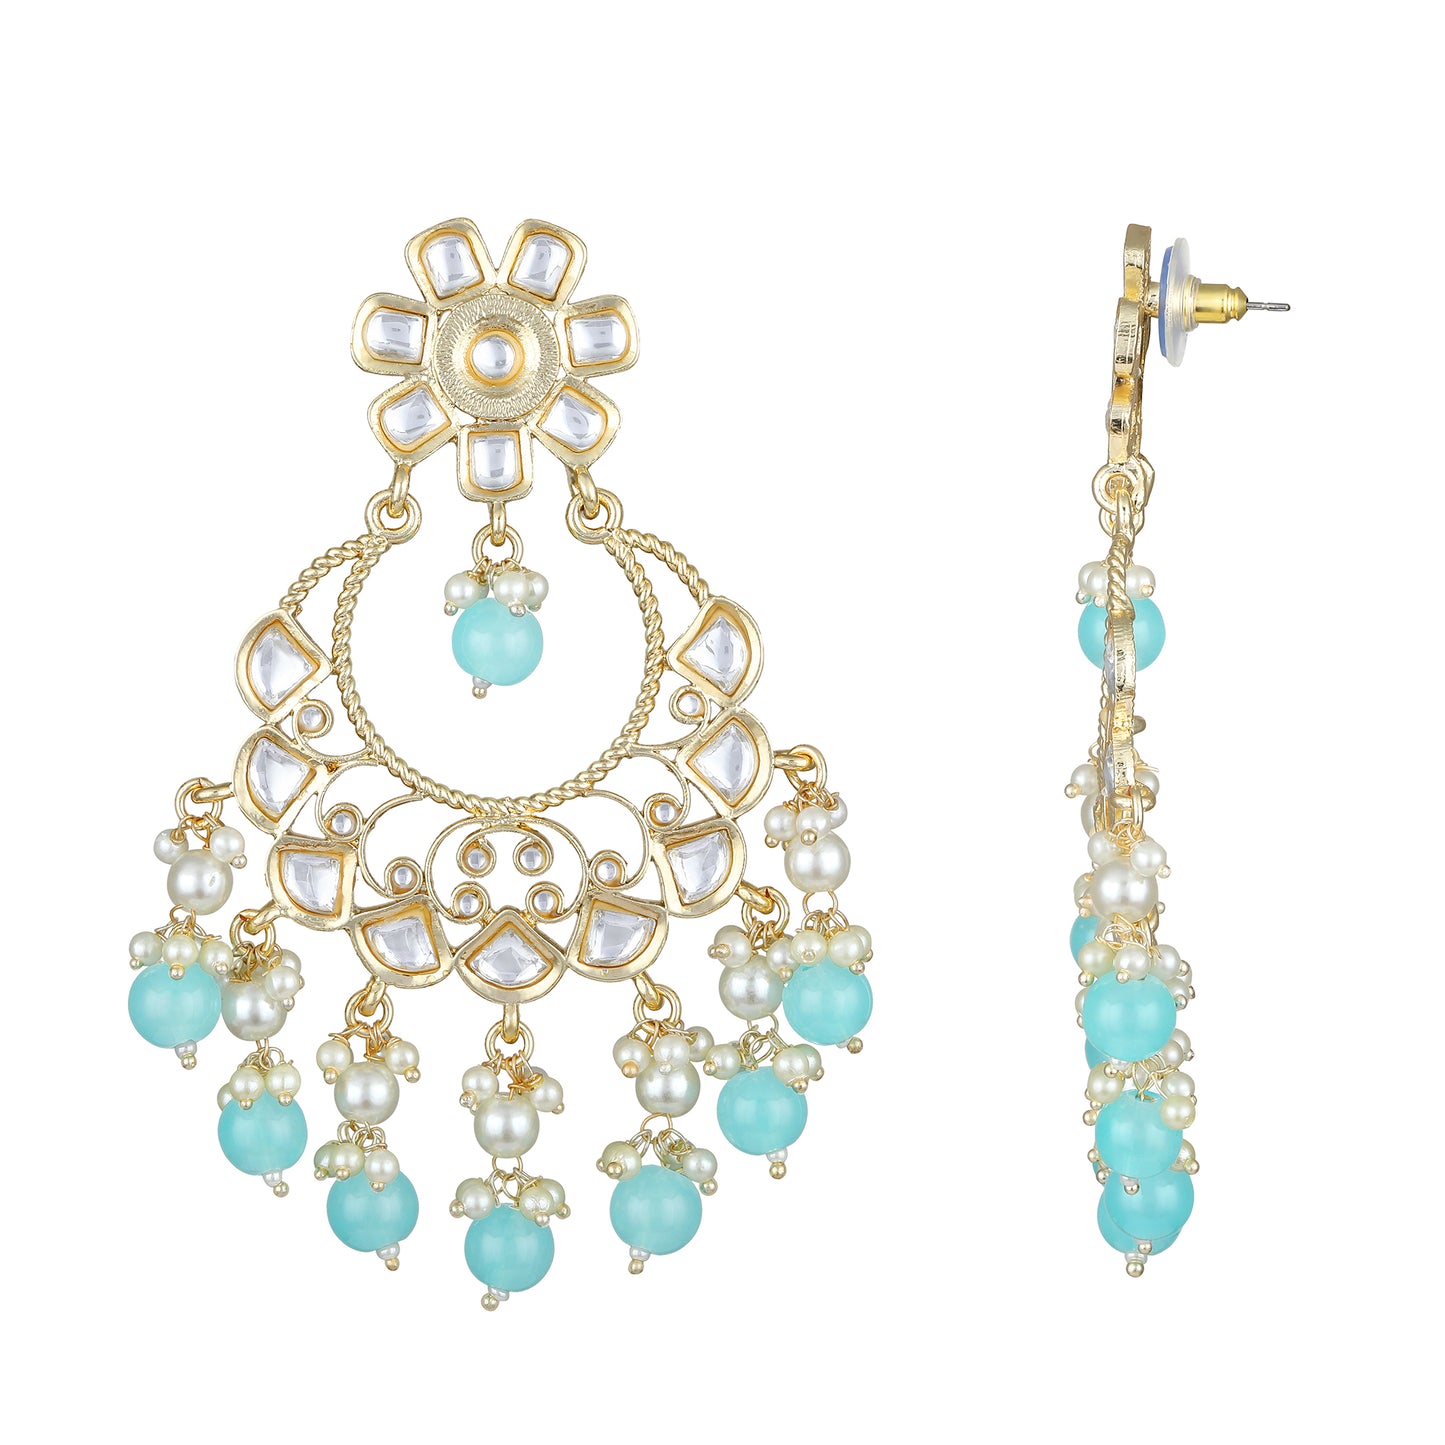 Bdiva 18K Gold Plated Turquiose Chandbali Earrings with Semi Cultured Pearls